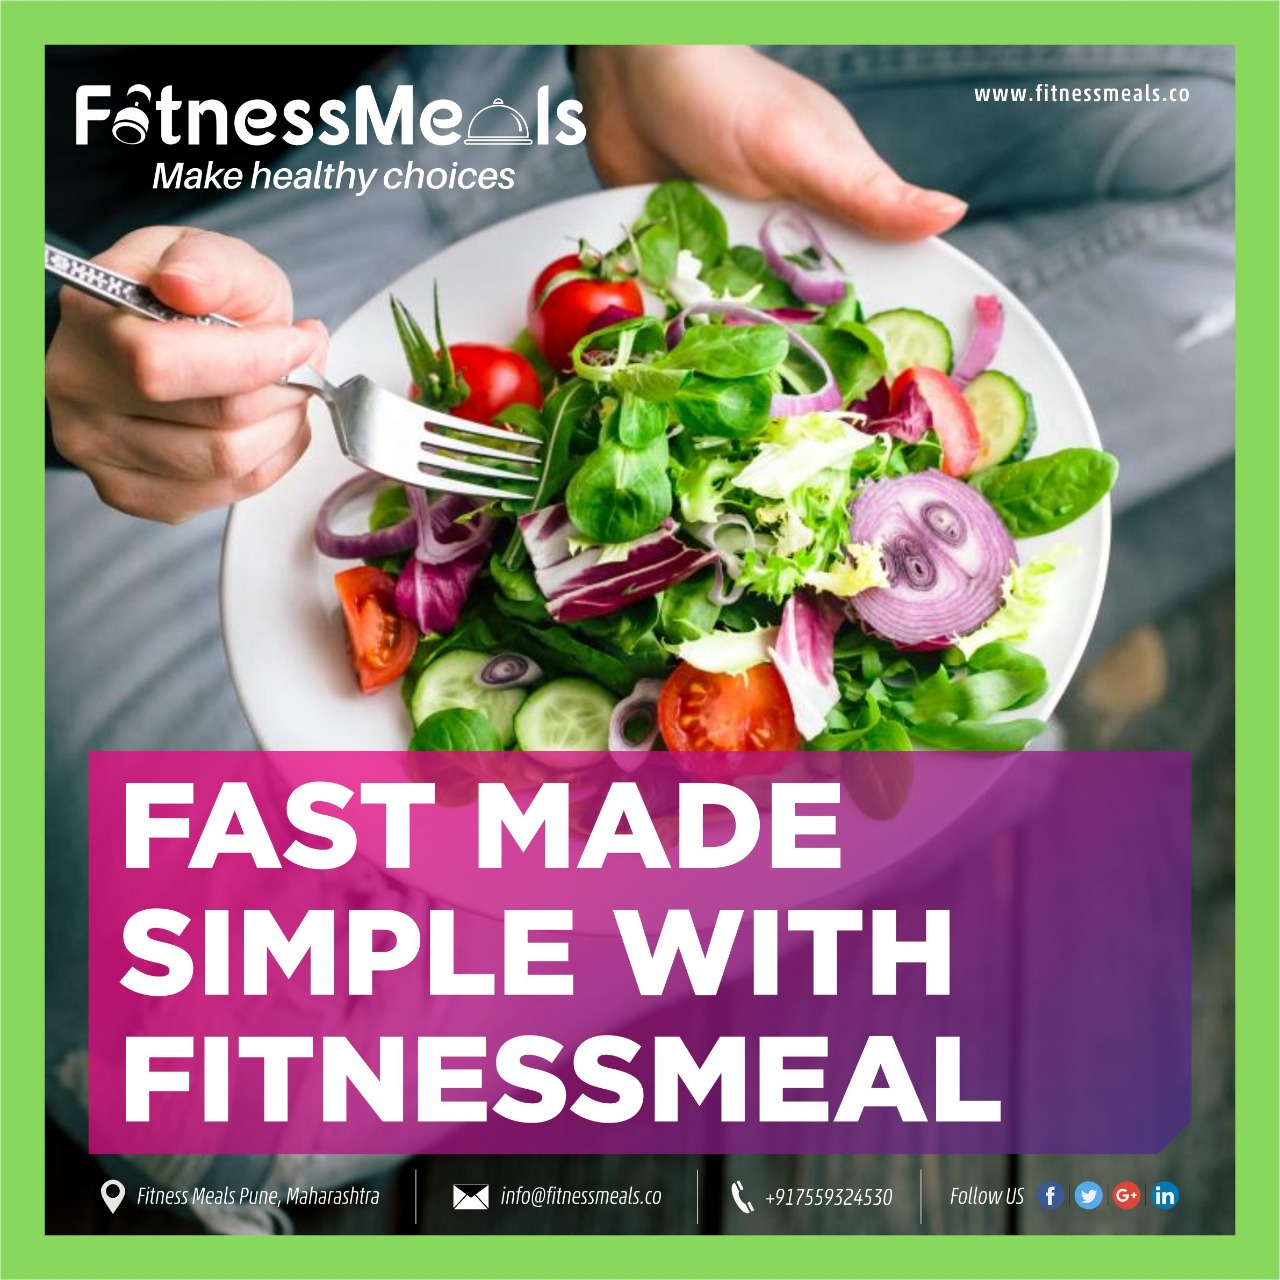 fitness meals pune